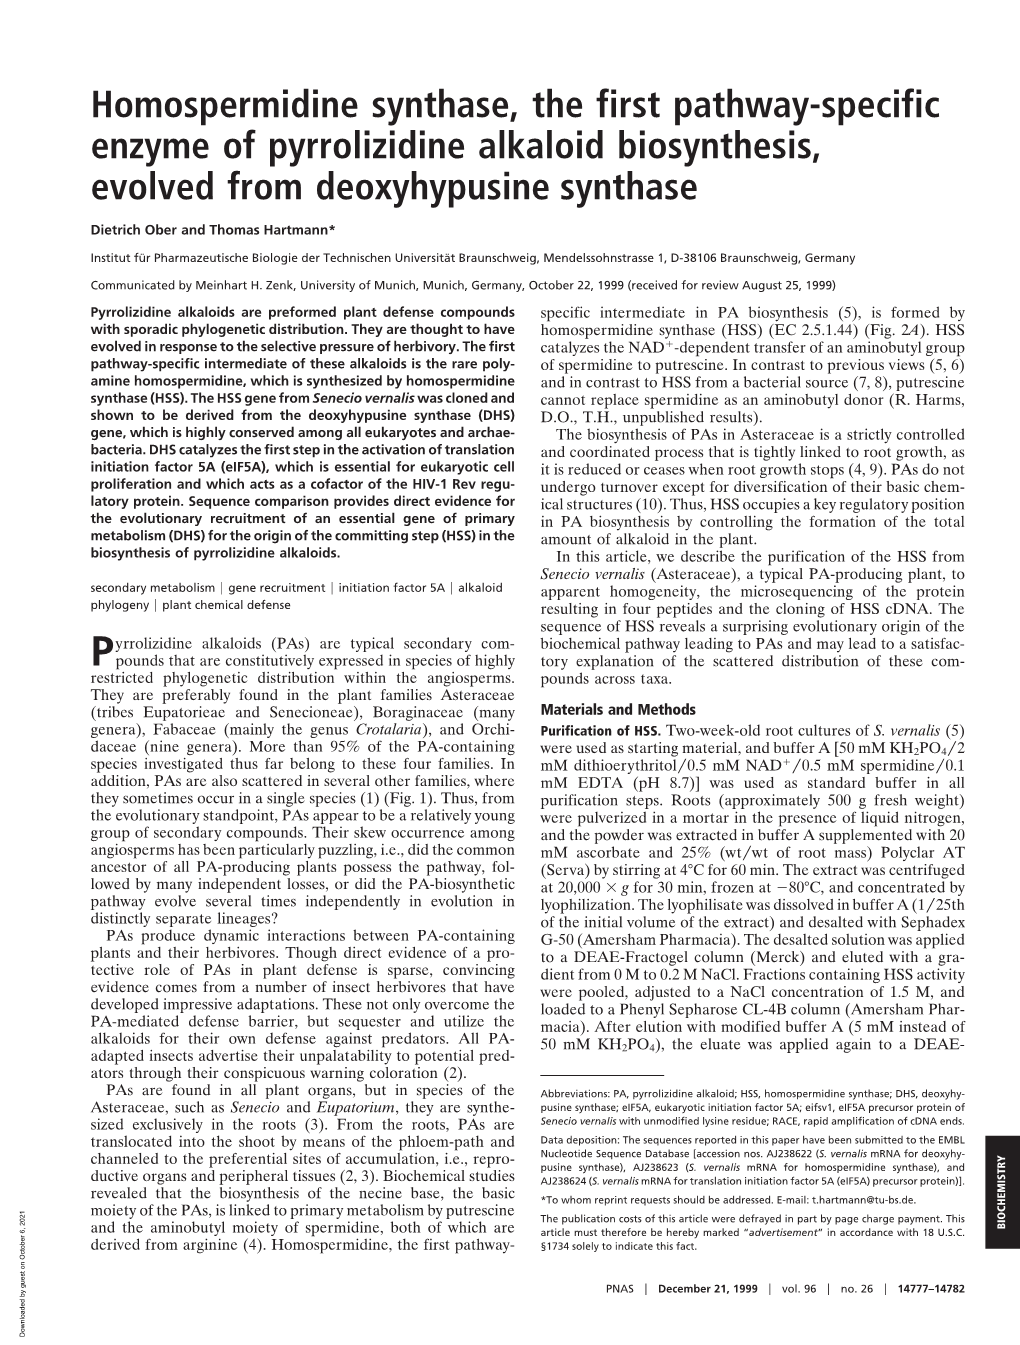 Homospermidine Synthase, the First Pathway-Specific Enzyme of Pyrrolizidine Alkaloid Biosynthesis, Evolved from Deoxyhypusine Synthase